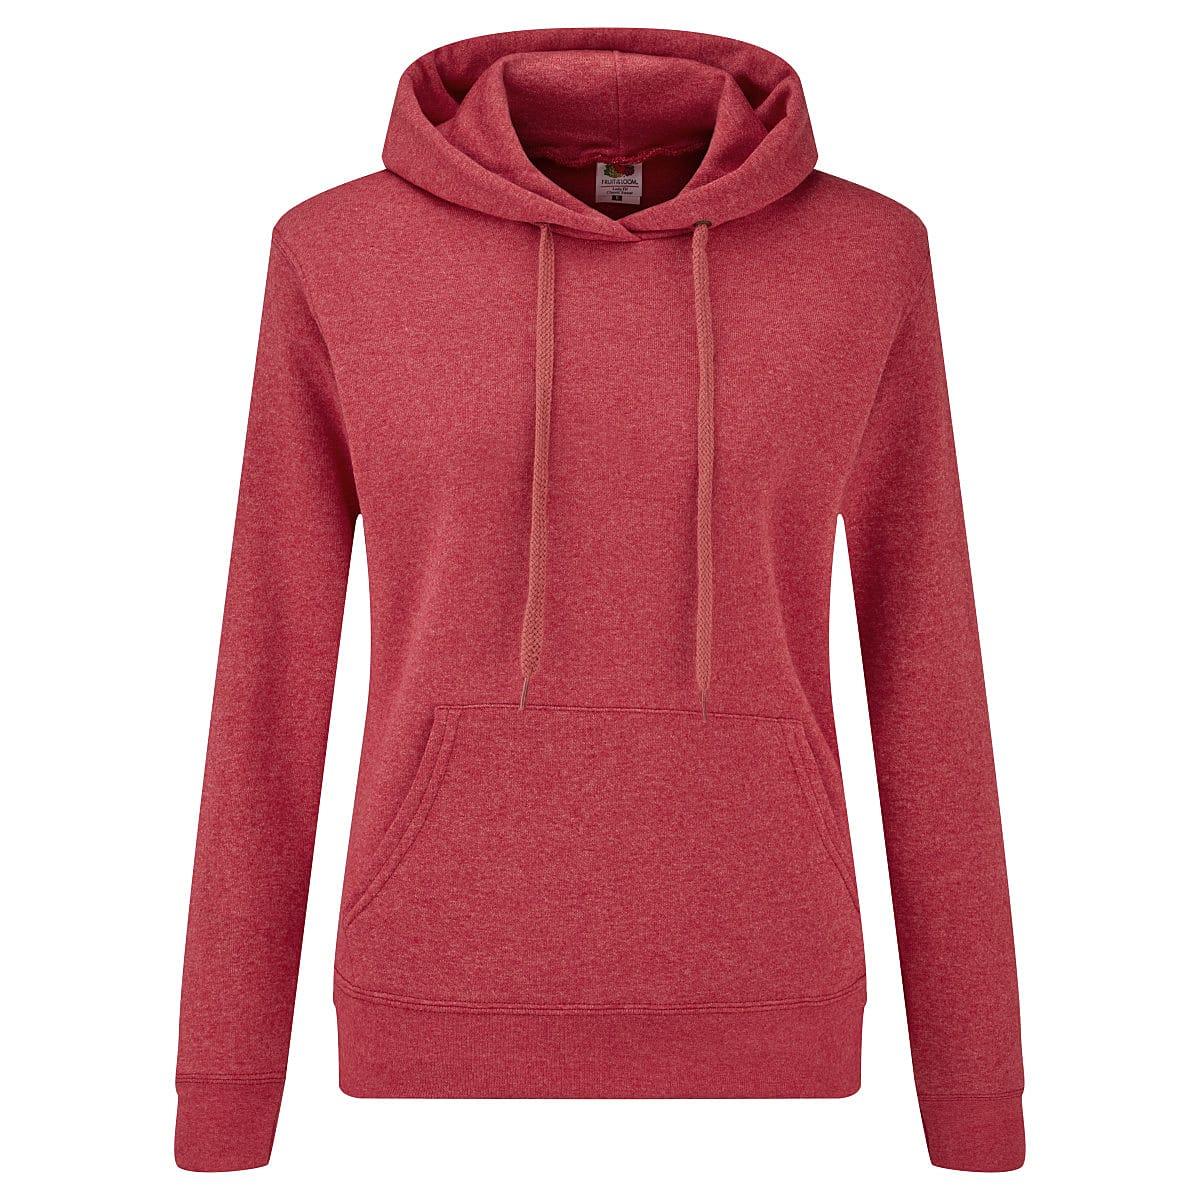 Fruit Of The Loom Lady-Fit Classic Hoodie in Vintage Heather Red (Product Code: 62038)